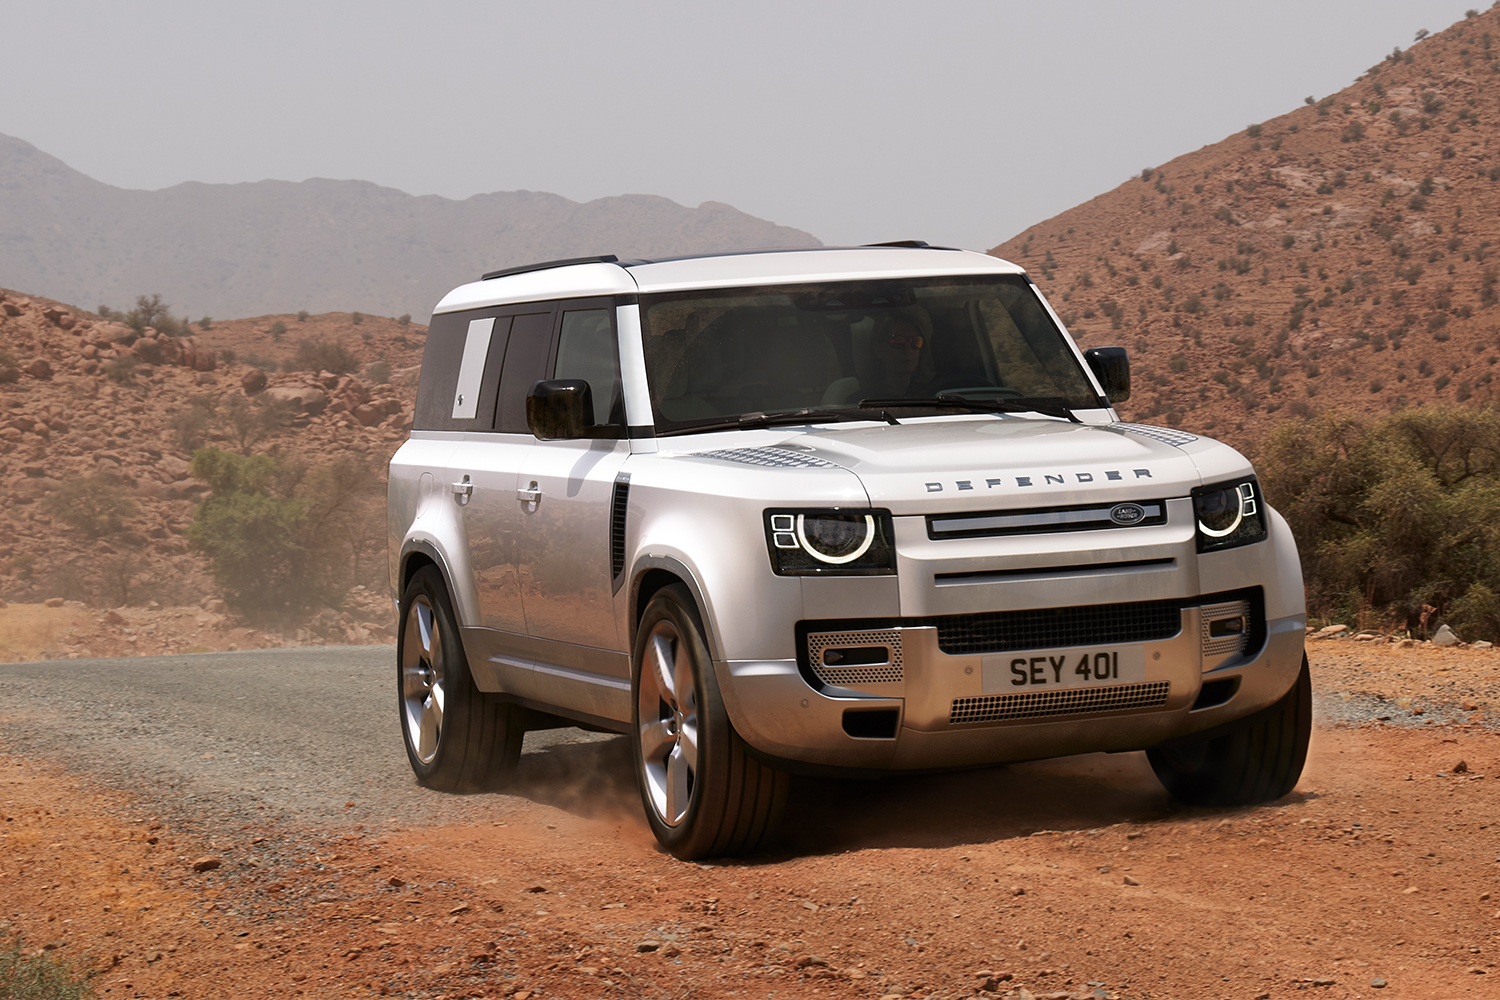 The Land Rover Defender 130, the three-row version of the SUV, in white driving down a sandy road